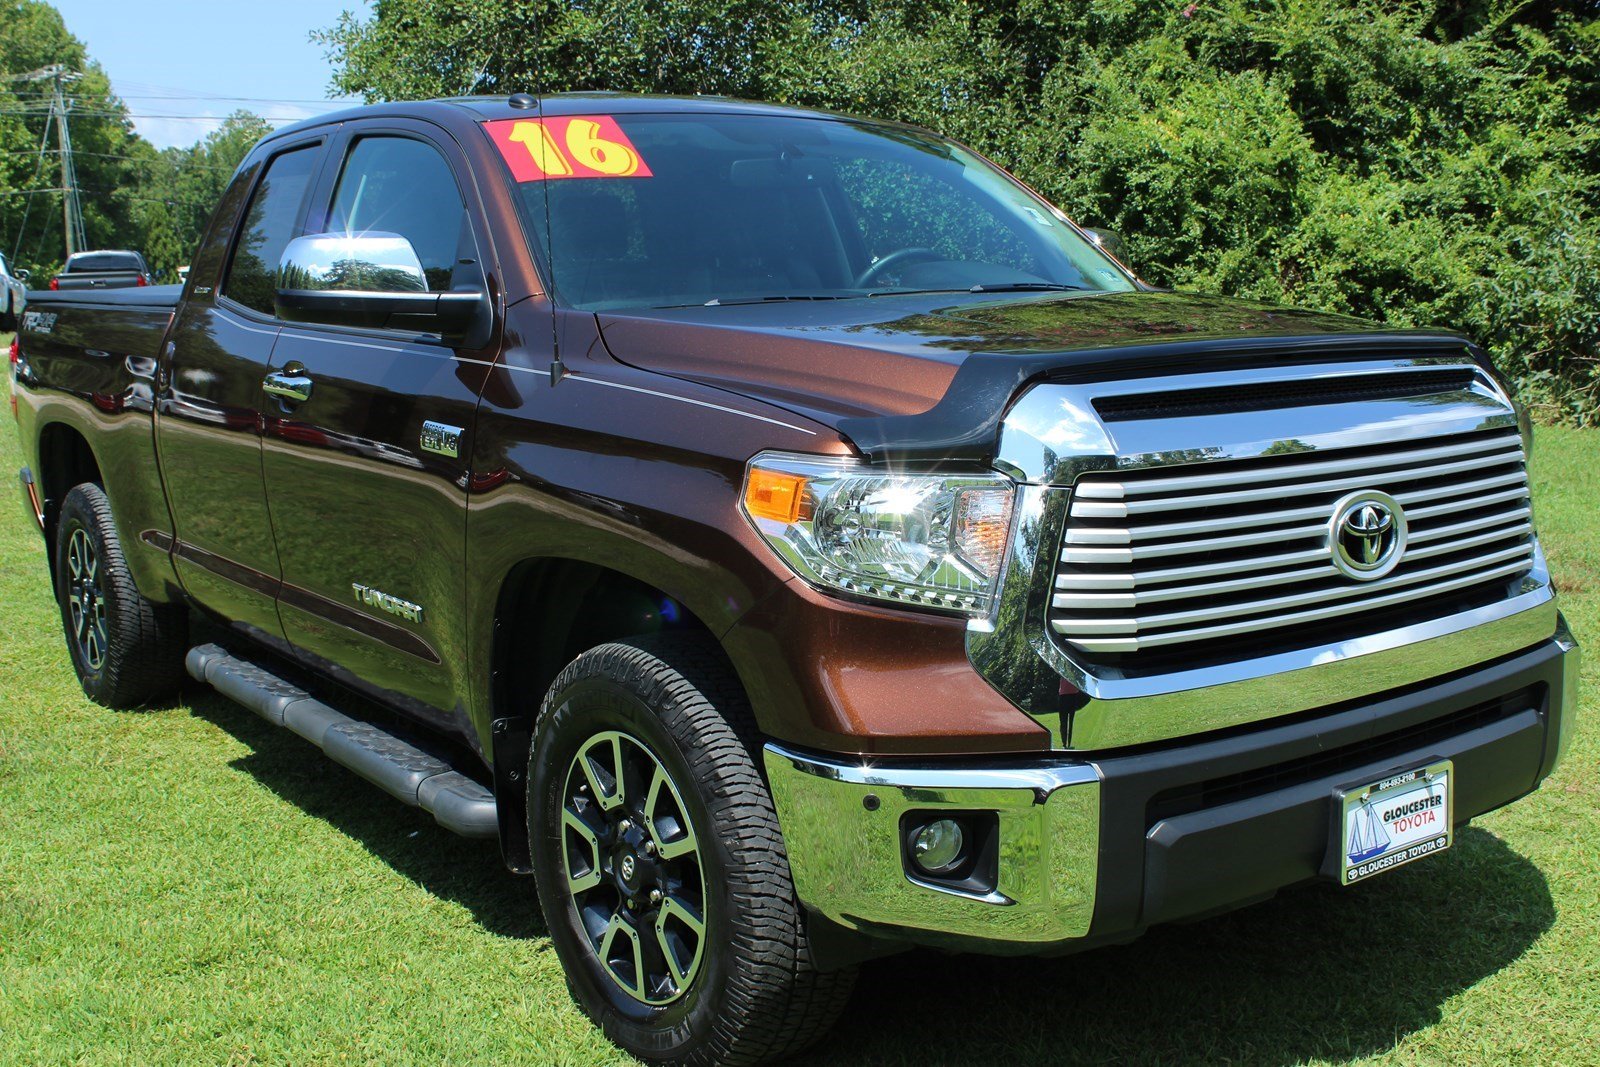 Pre-Owned 2016 Toyota Tundra 4WD Truck LTD Crew Cab Pickup in